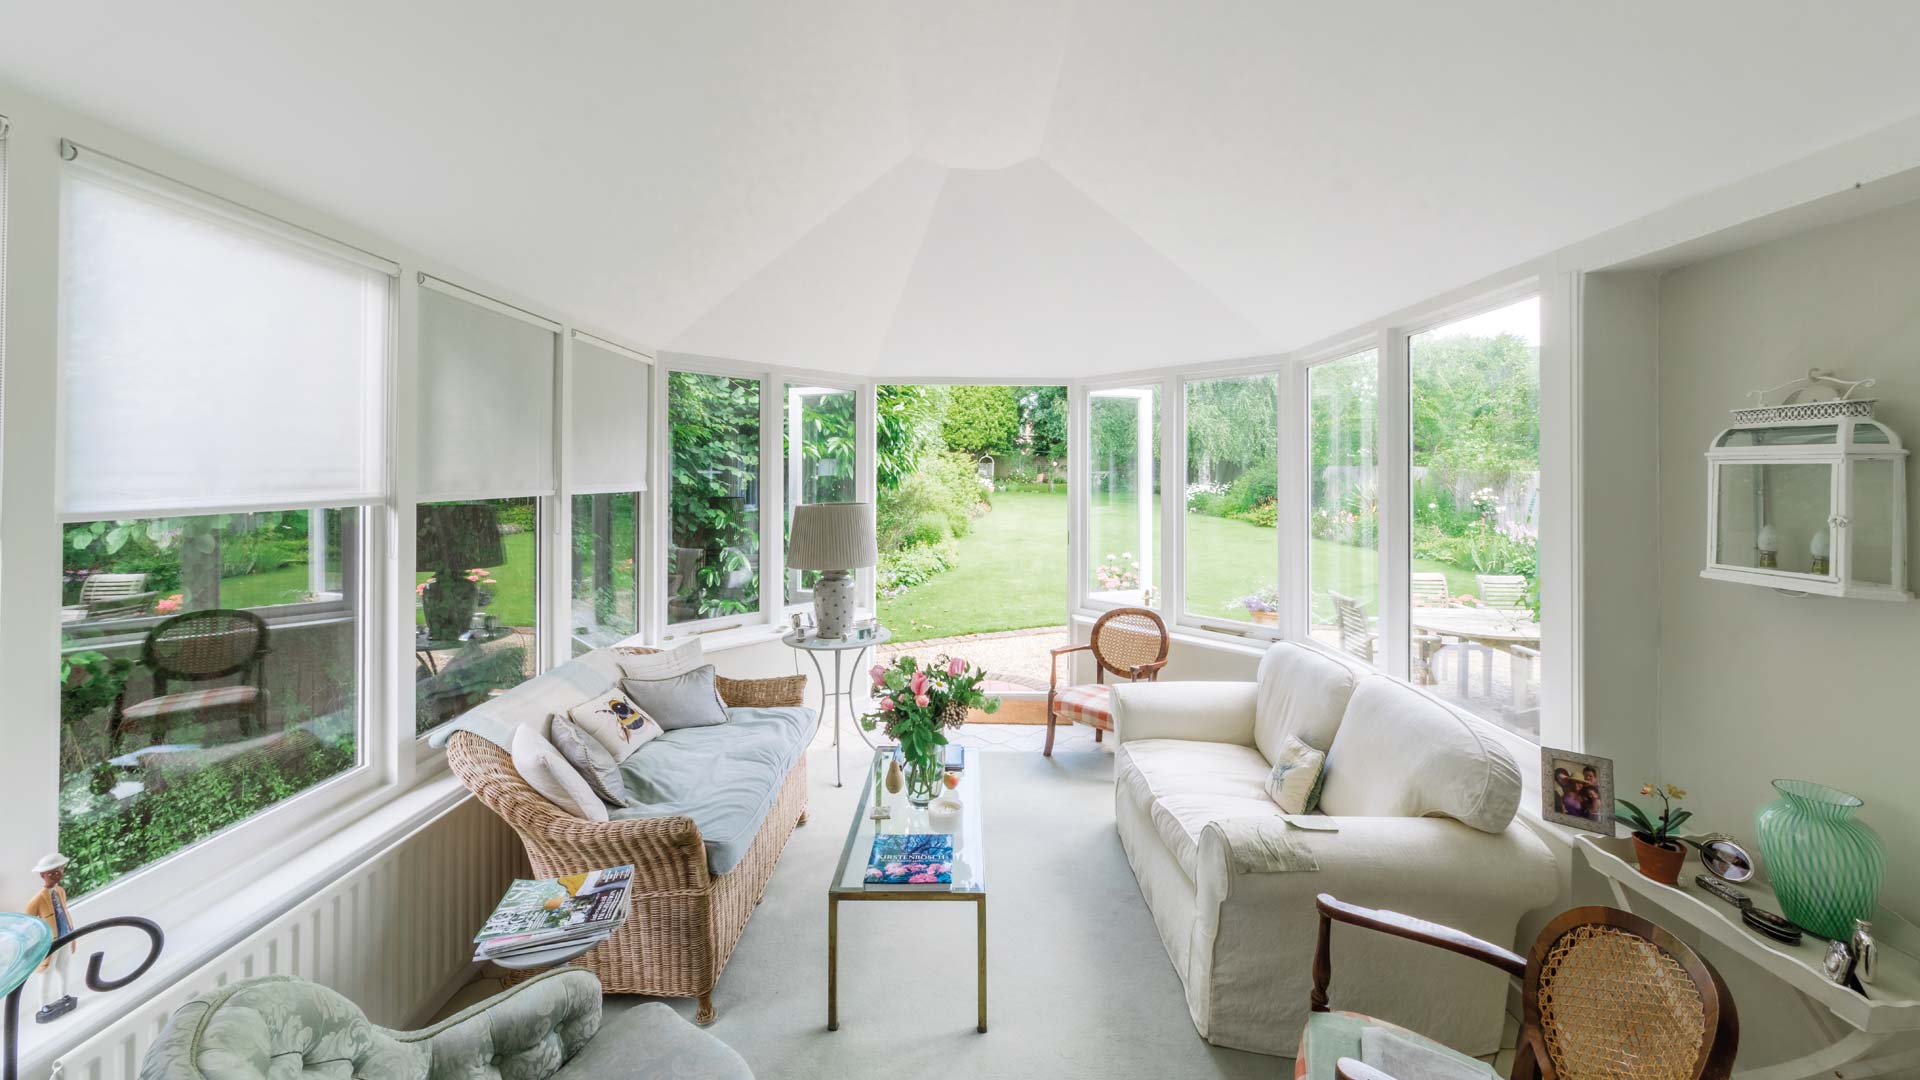 Guardian Home Modular Extension from Open Conservatory into a Living Room with Warm Roof